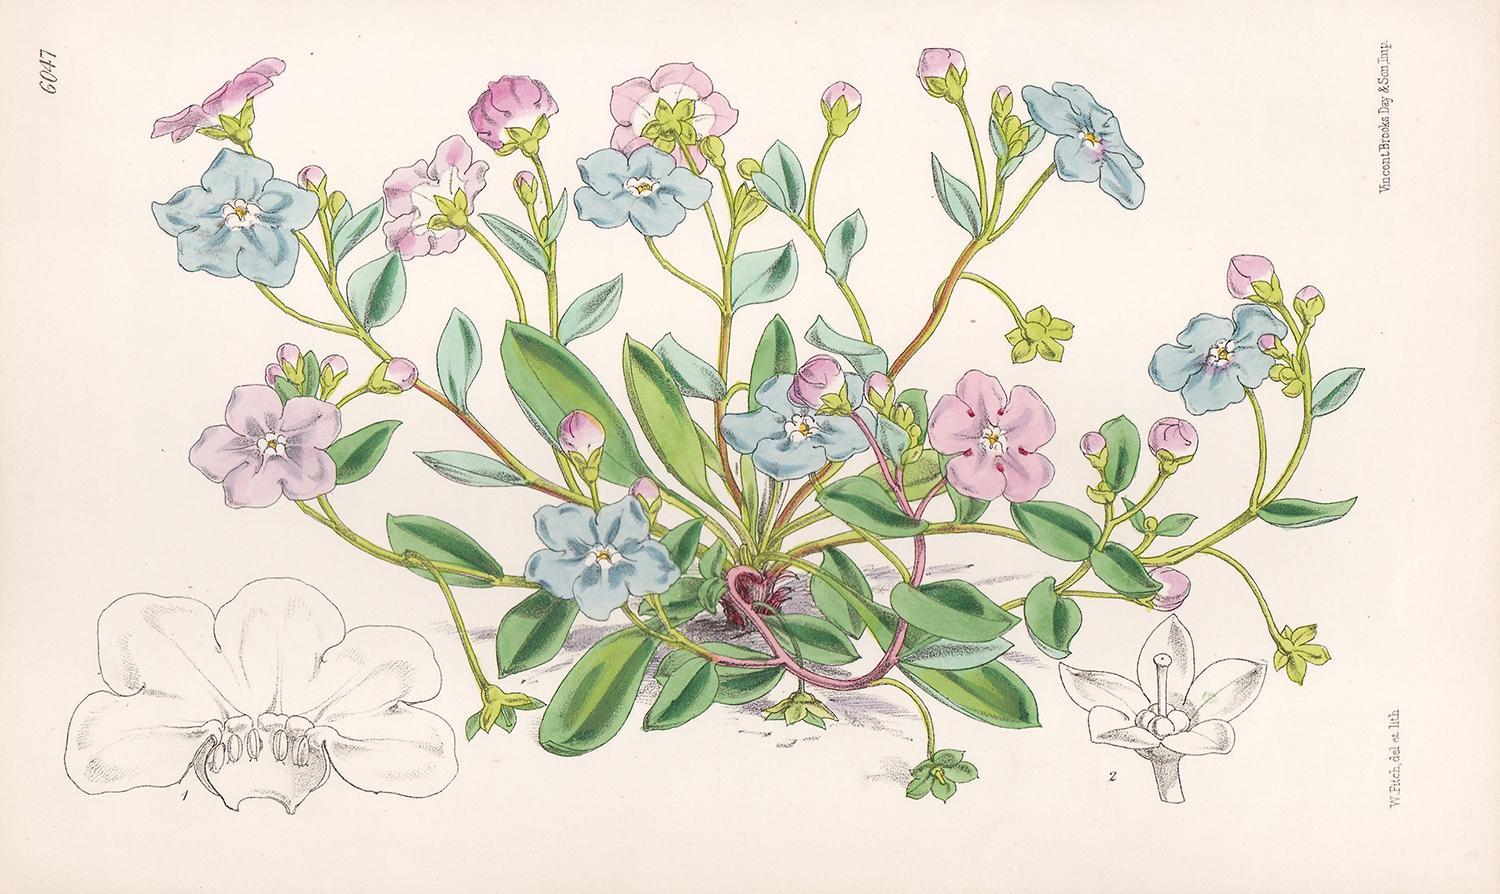 Still-Life Print Walter Hood Fitch - Omphalodes Lucillae, ancienne lithographie de fleurs botaniques